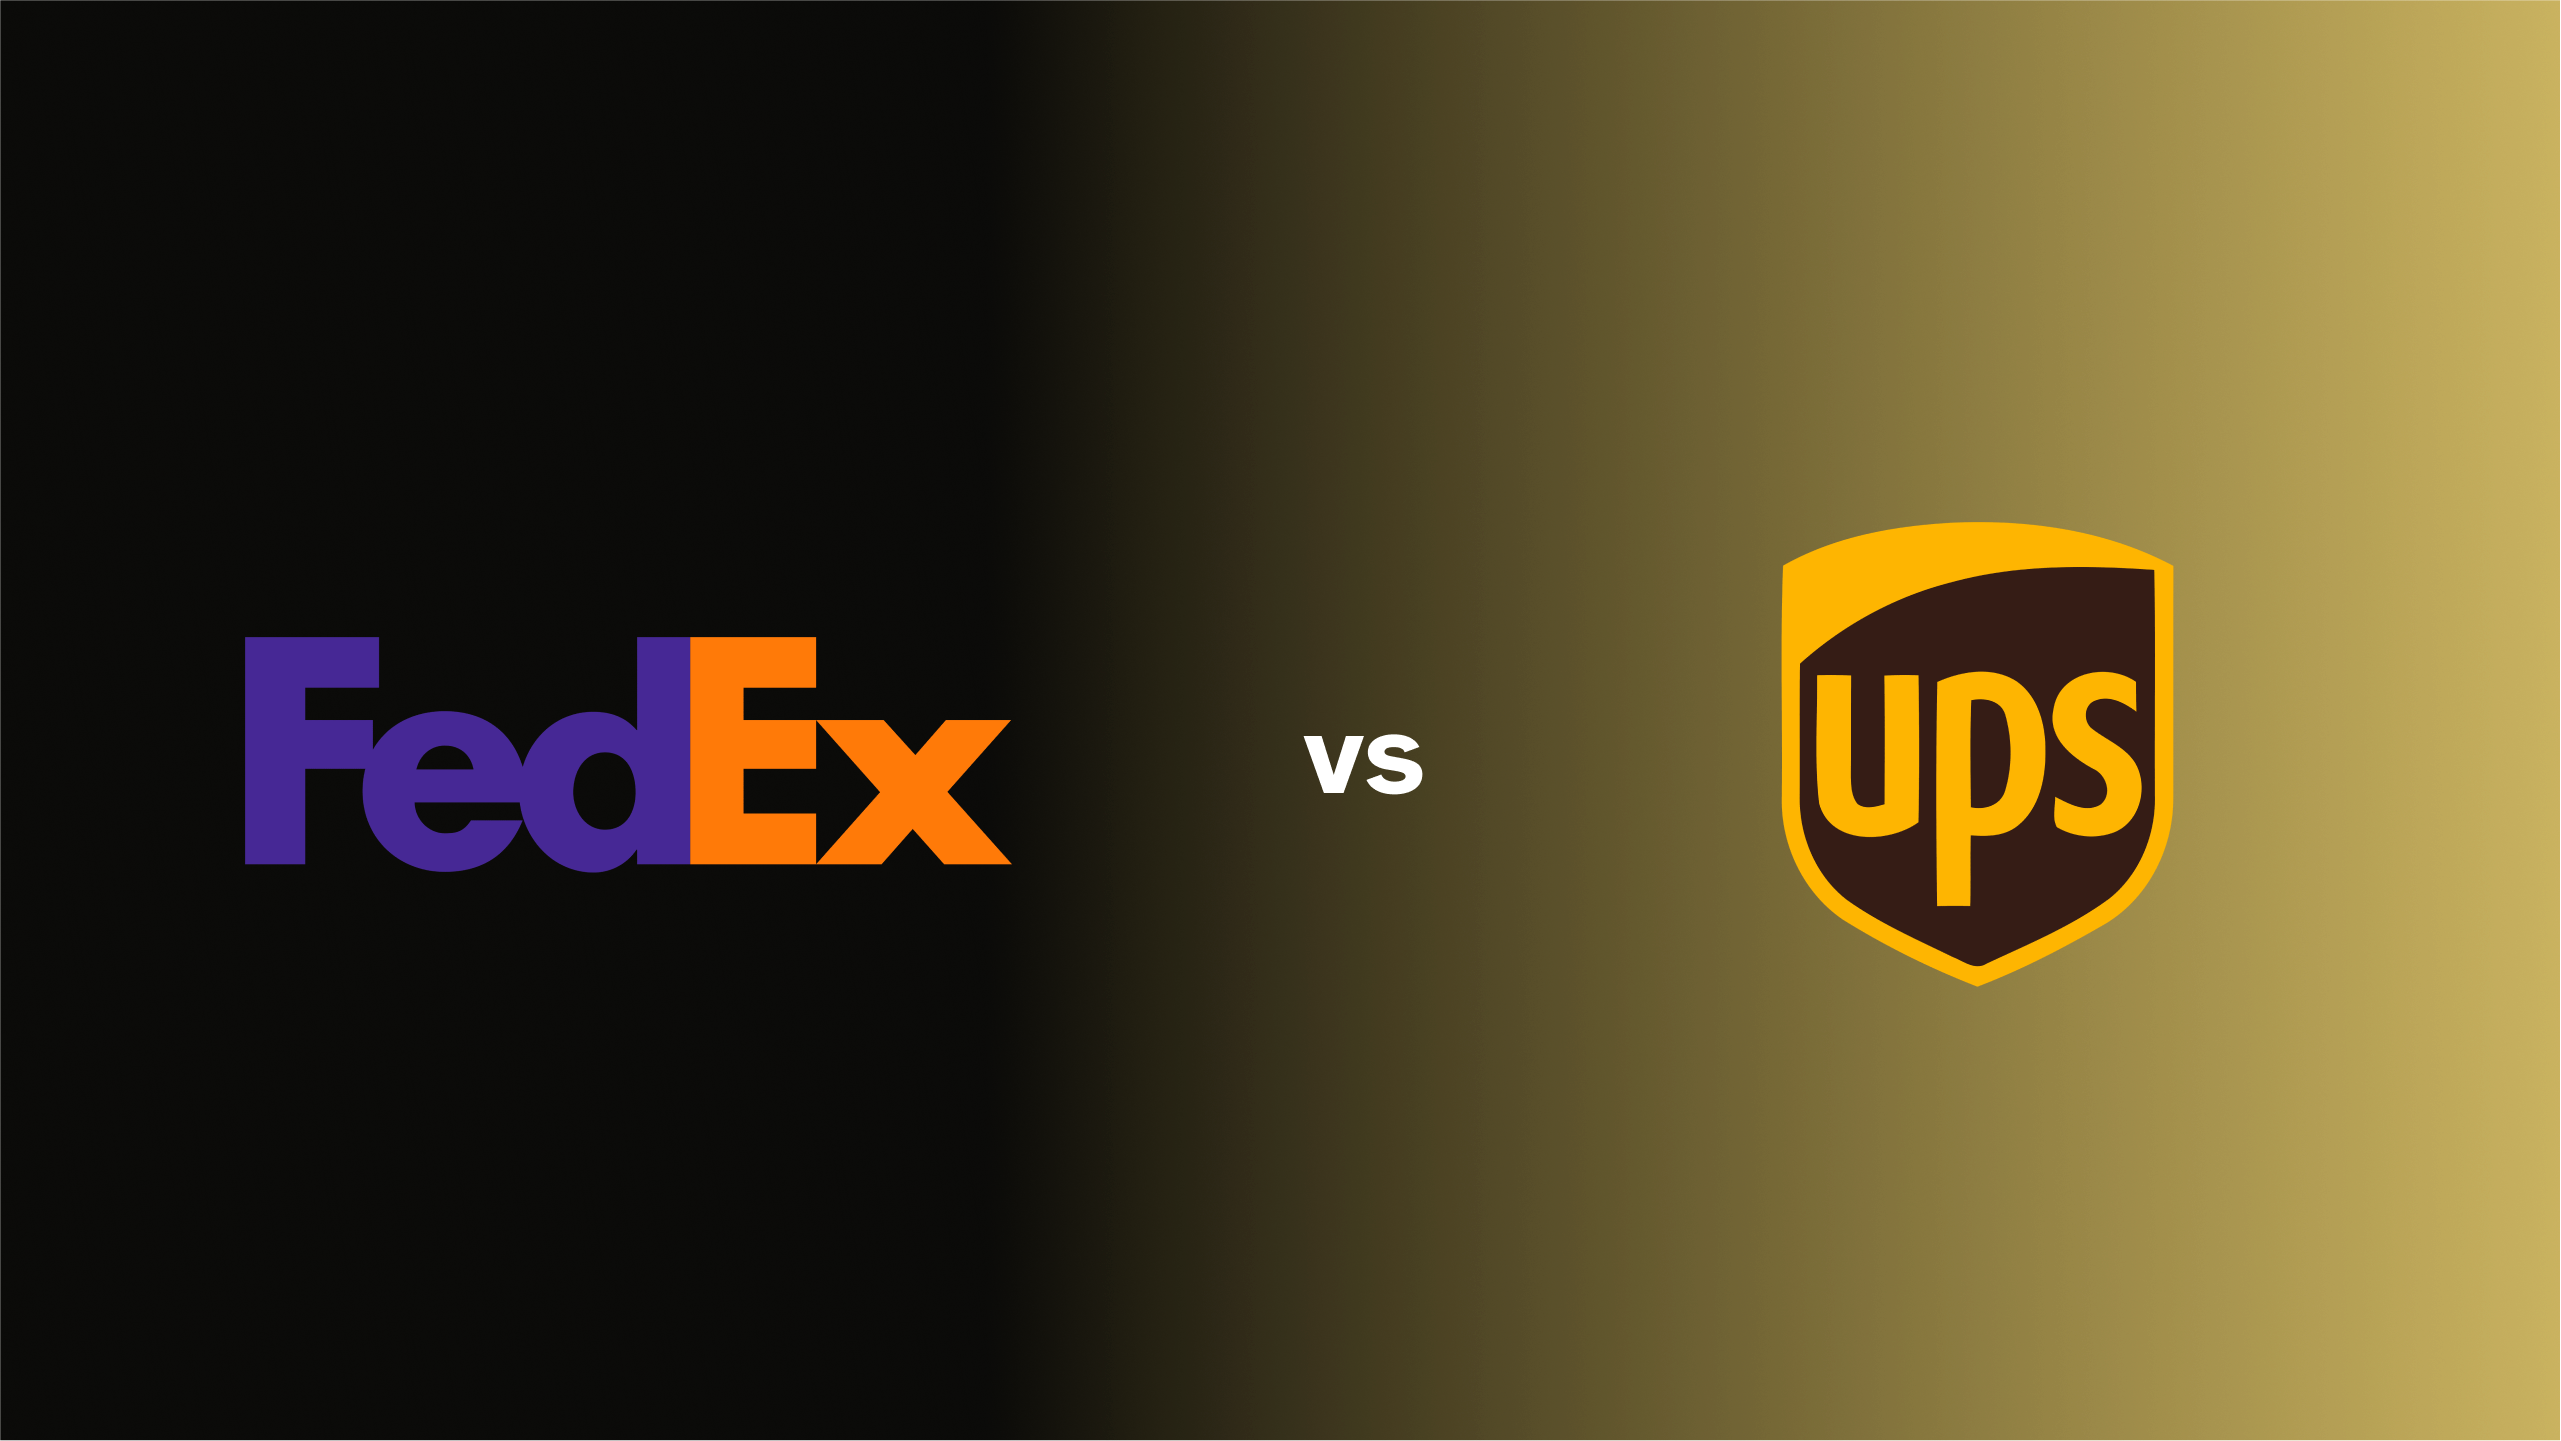 FedEx and UPS logos banner image